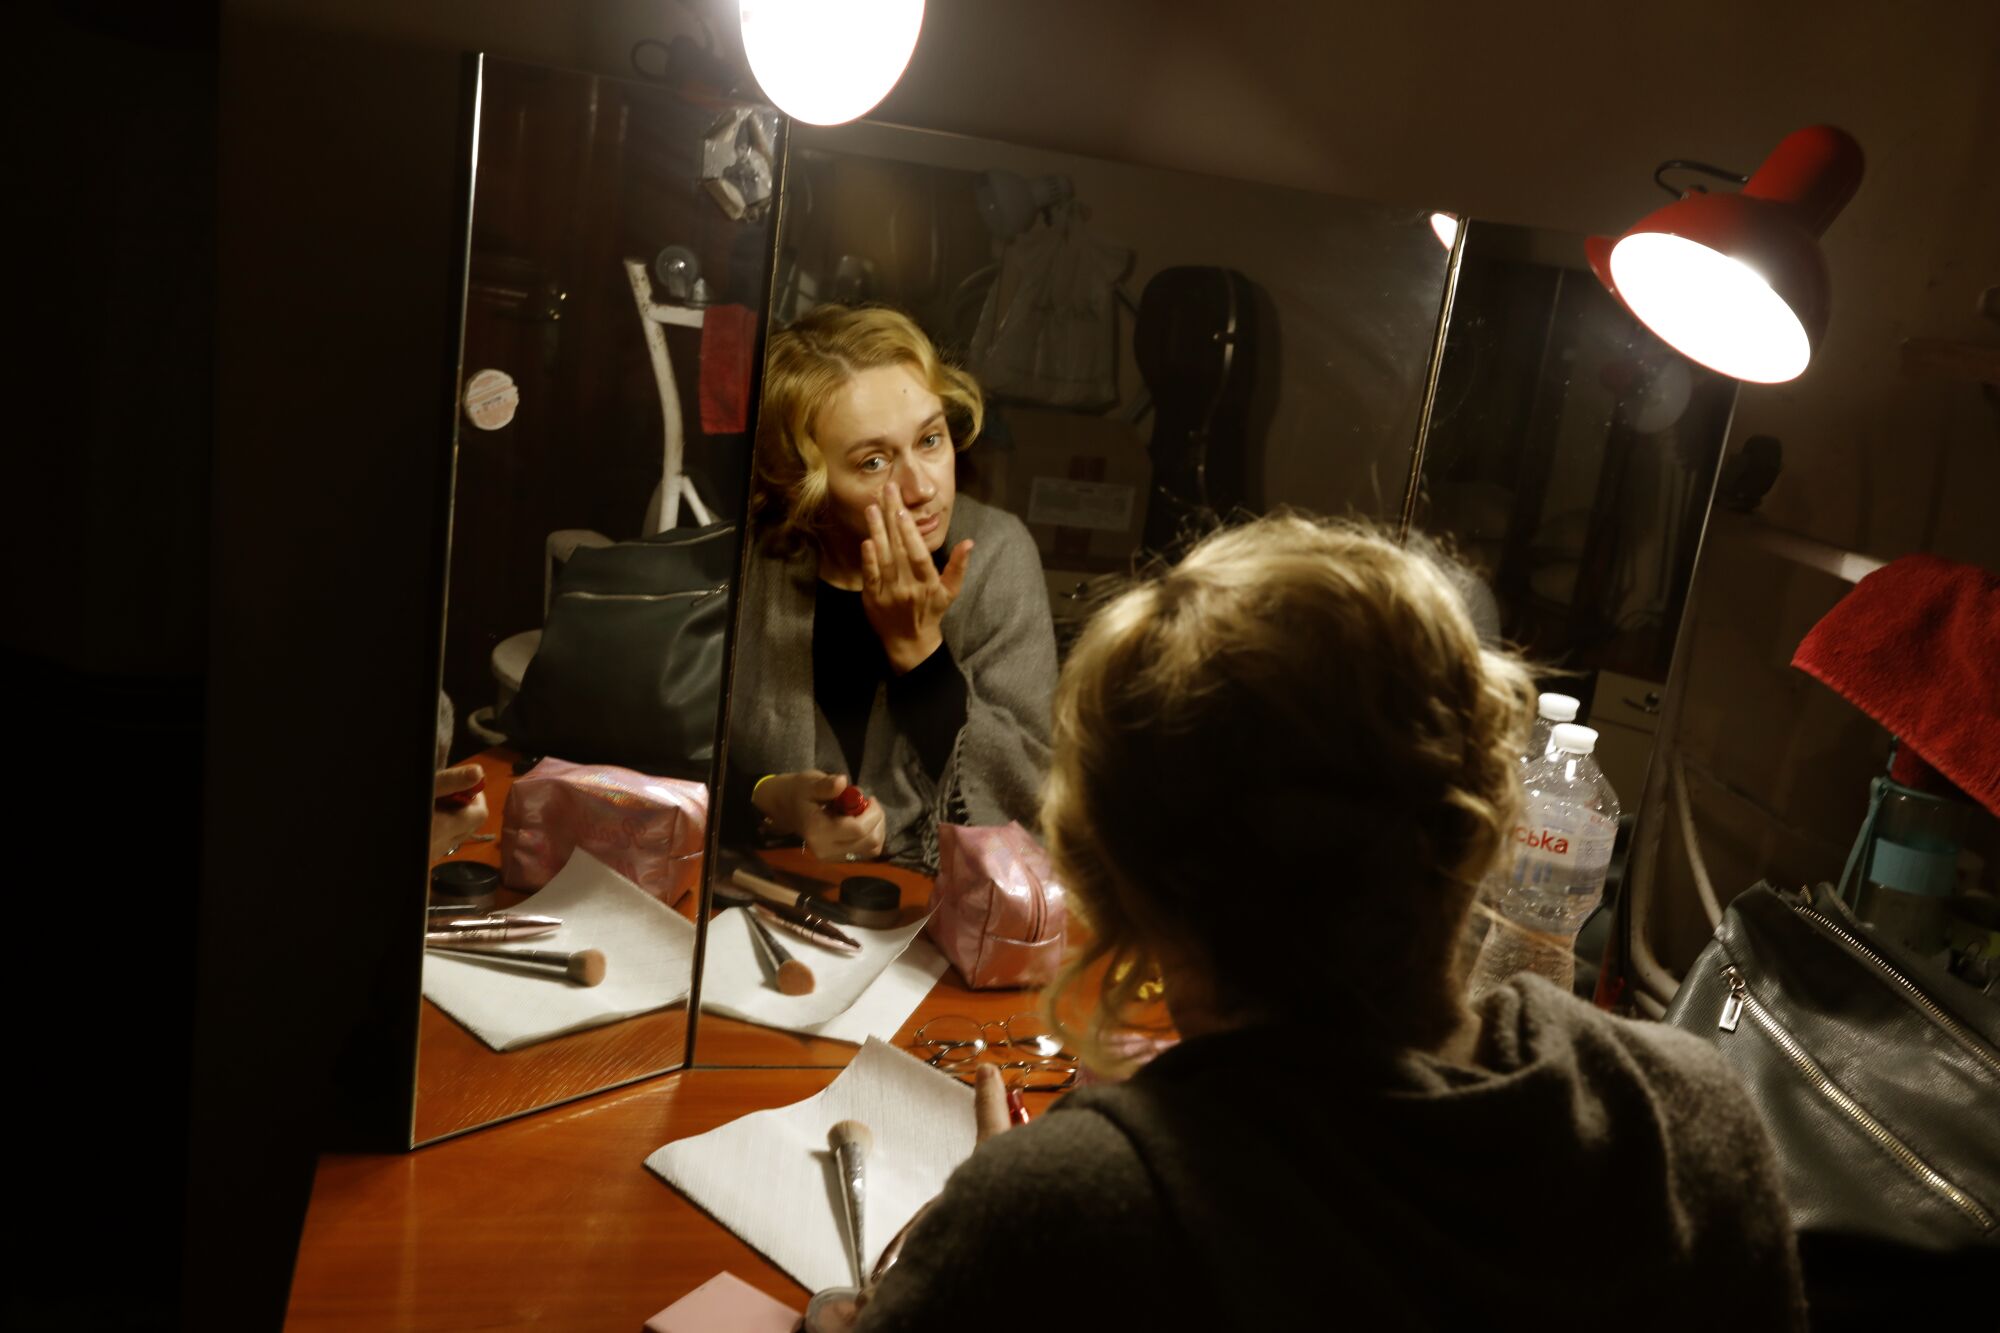 At the National Academy Ivan Franko Drama Theater, actress Vira Zinevych-Mazur prepares to go on stage